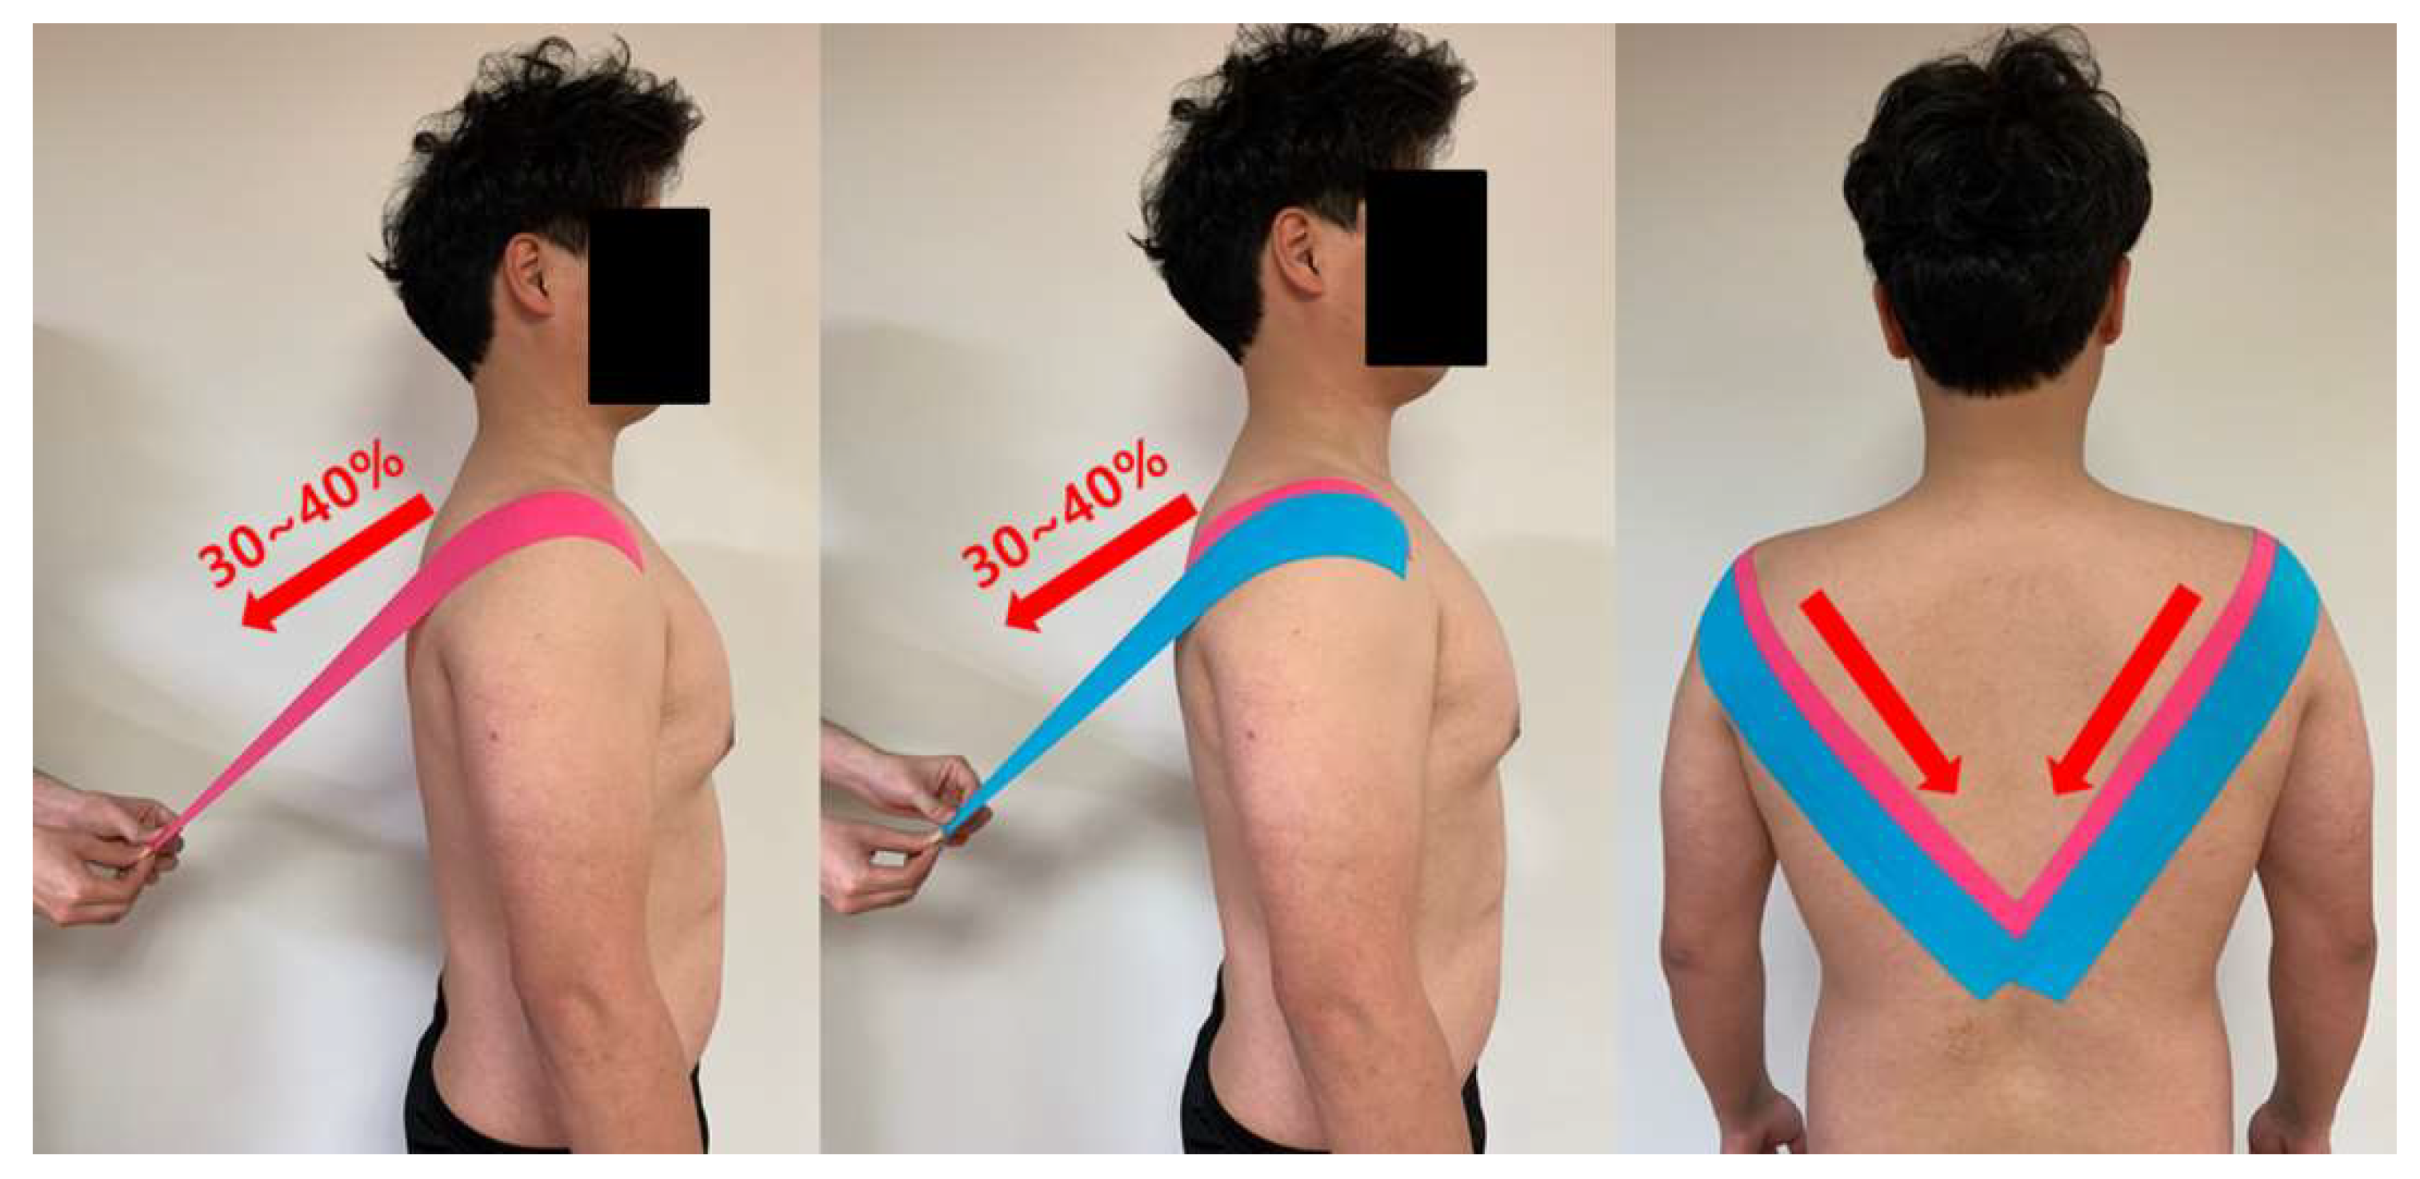 Life | Free Full-Text | Effects of Kinesiology Taping on Shoulder Posture  and Peak Torque in Junior Baseball Players with Rounded Shoulder Posture: A  Pilot Study